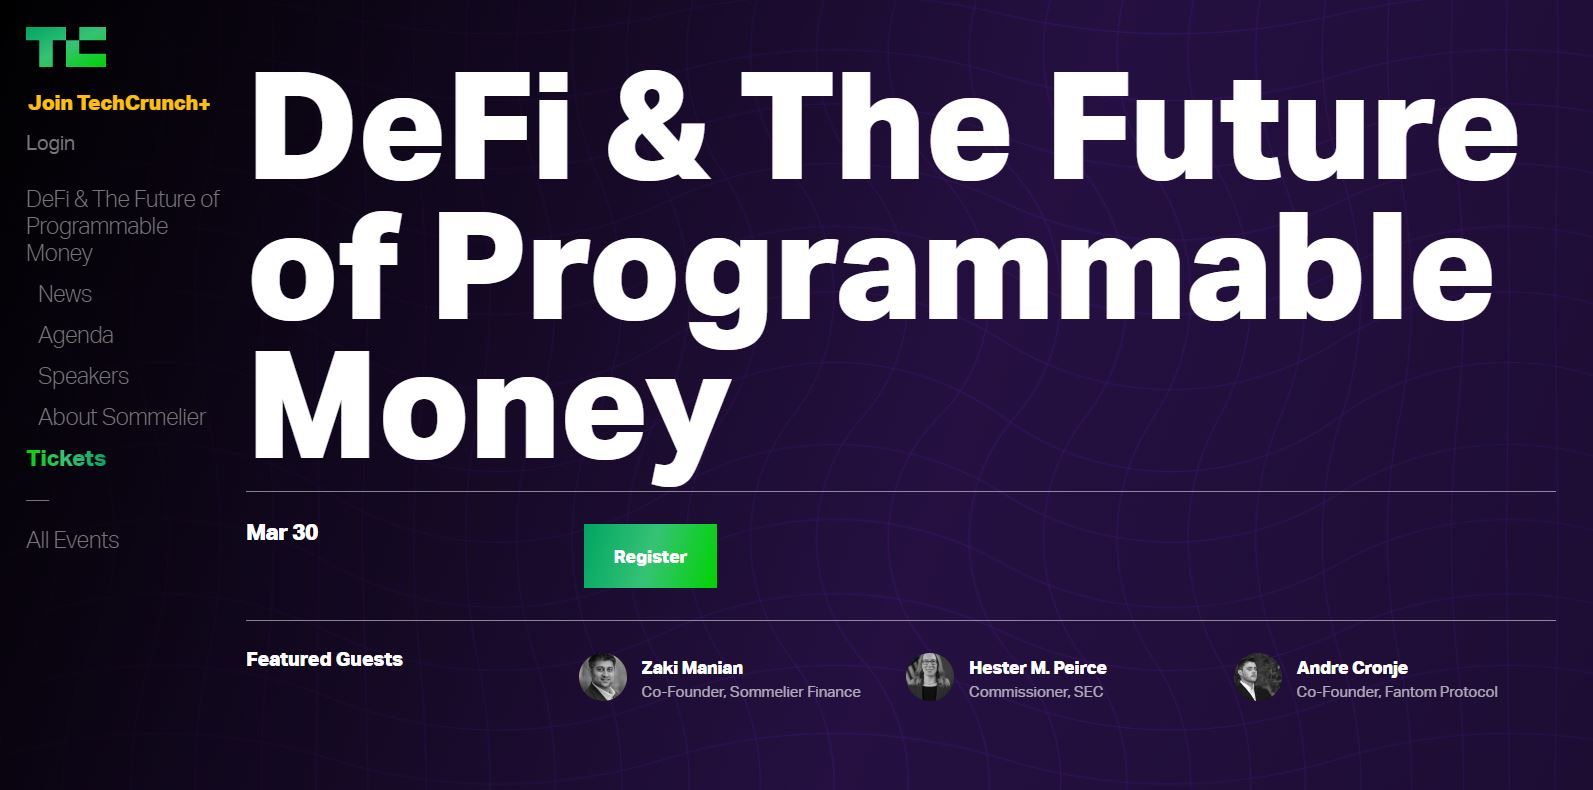 DeFi - The Future of Programmable Money